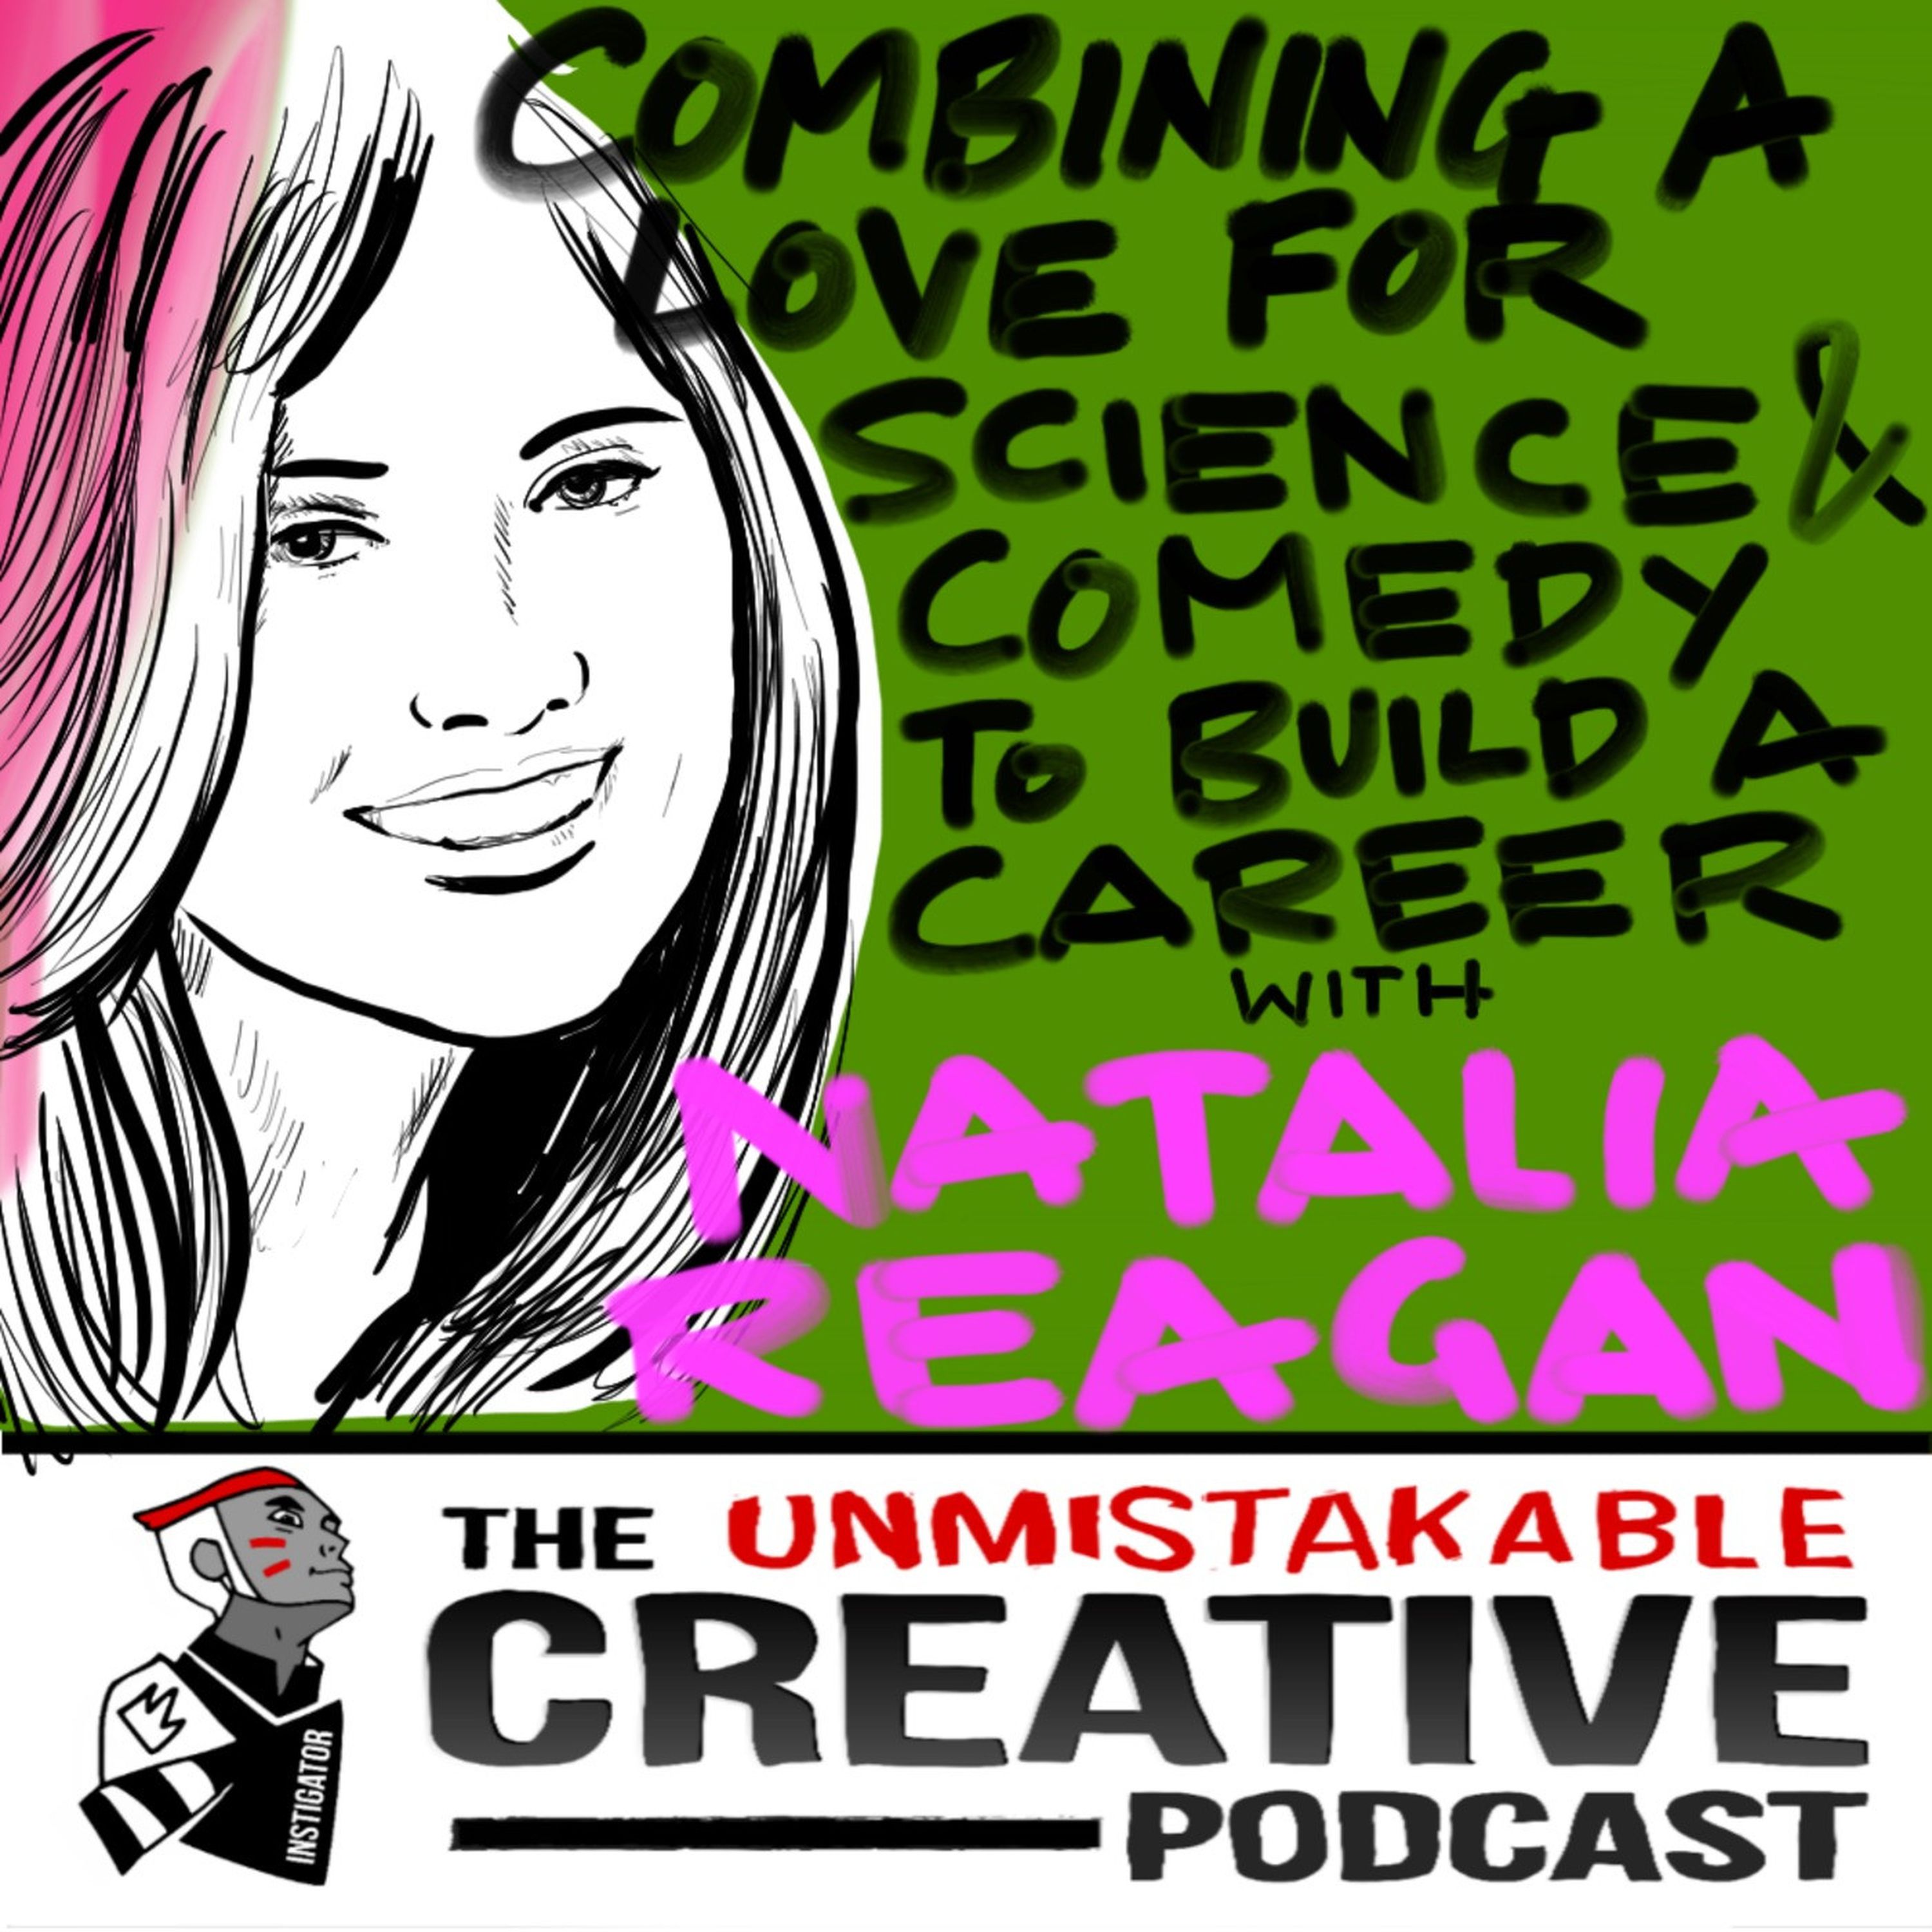 Combining a Love for Science and Comedy to Build a Career with Natalia Reagan Image